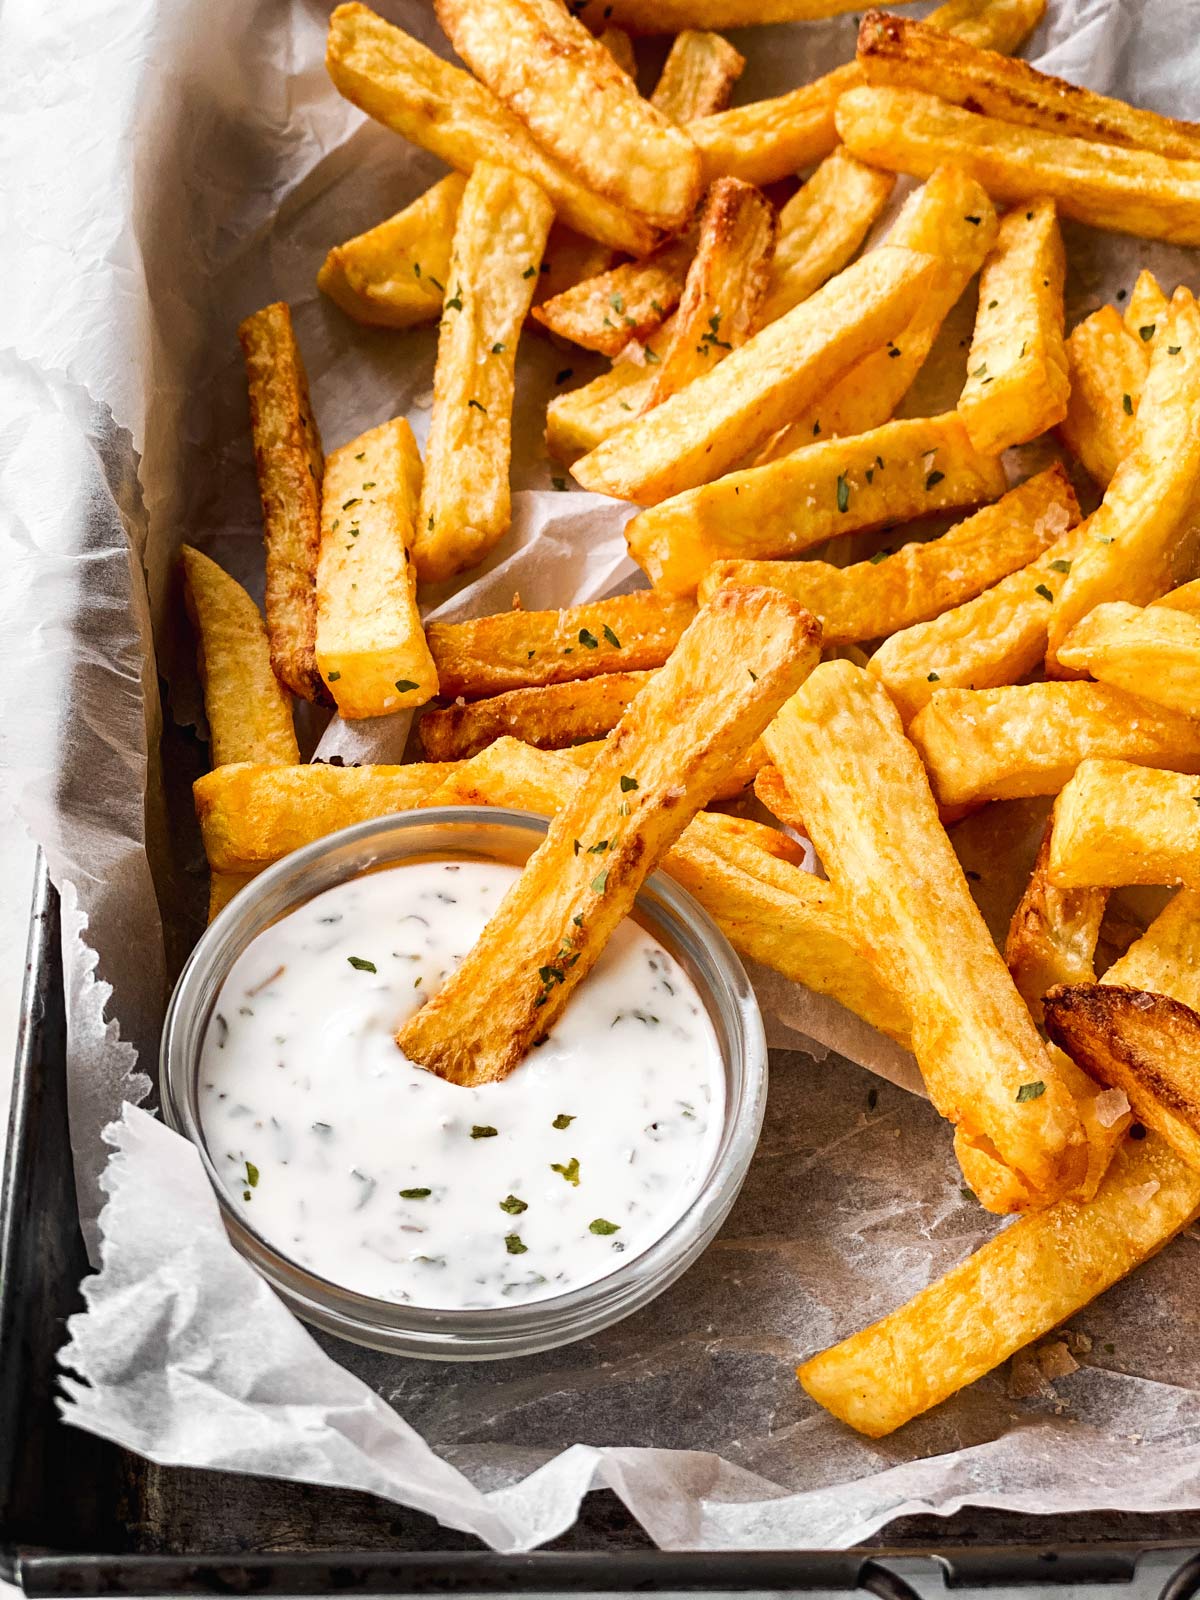 https://www.wholesomerecipebox.com/wp-content/uploads/2021/01/air-fryer-french-fries-image-13.jpg